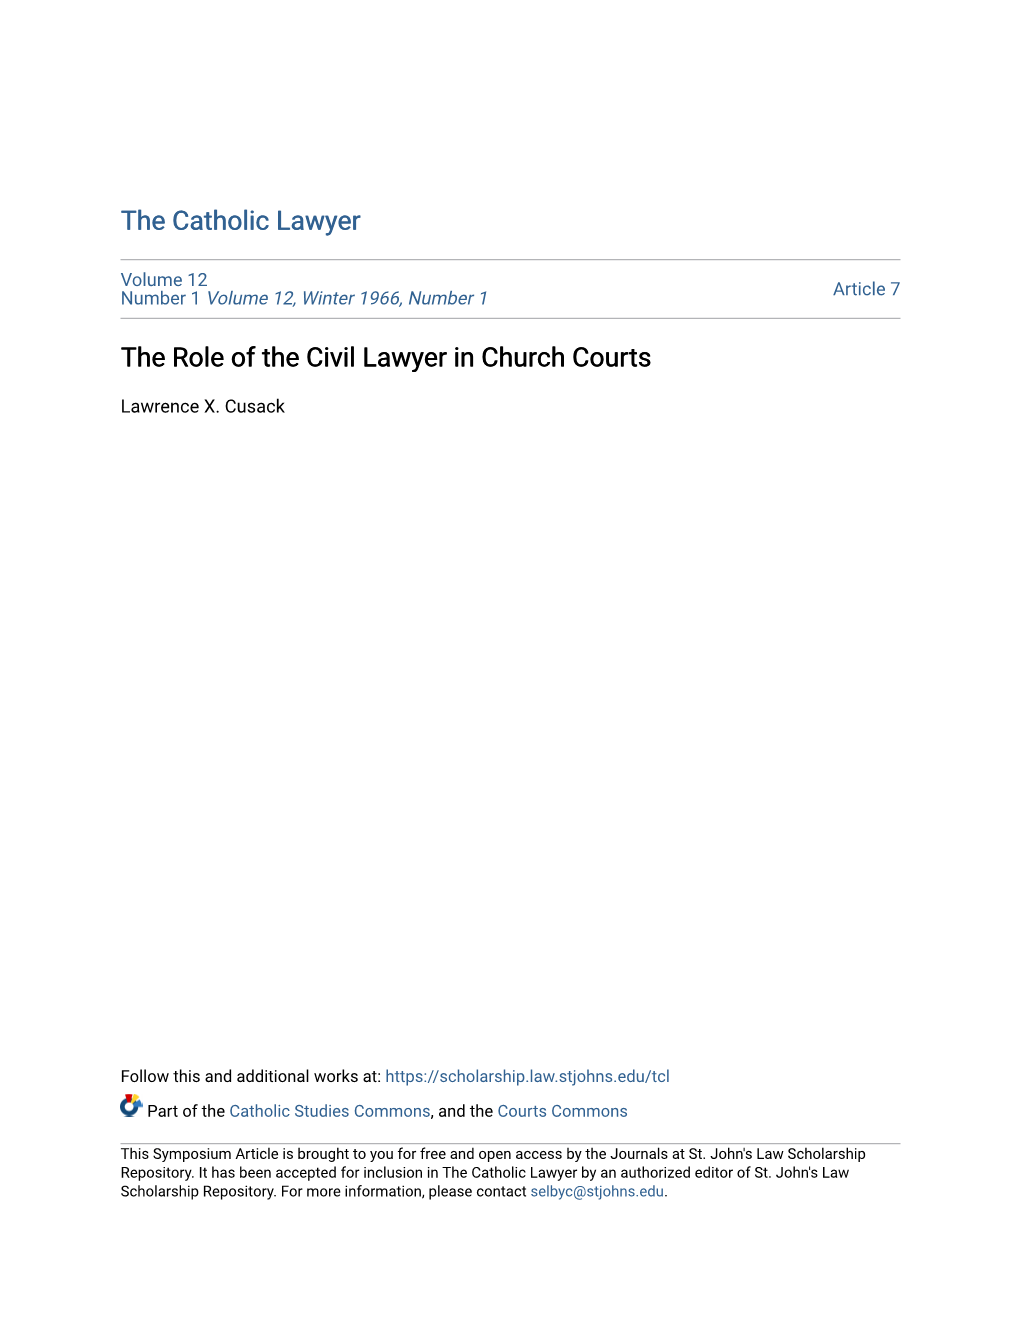 The Role of the Civil Lawyer in Church Courts